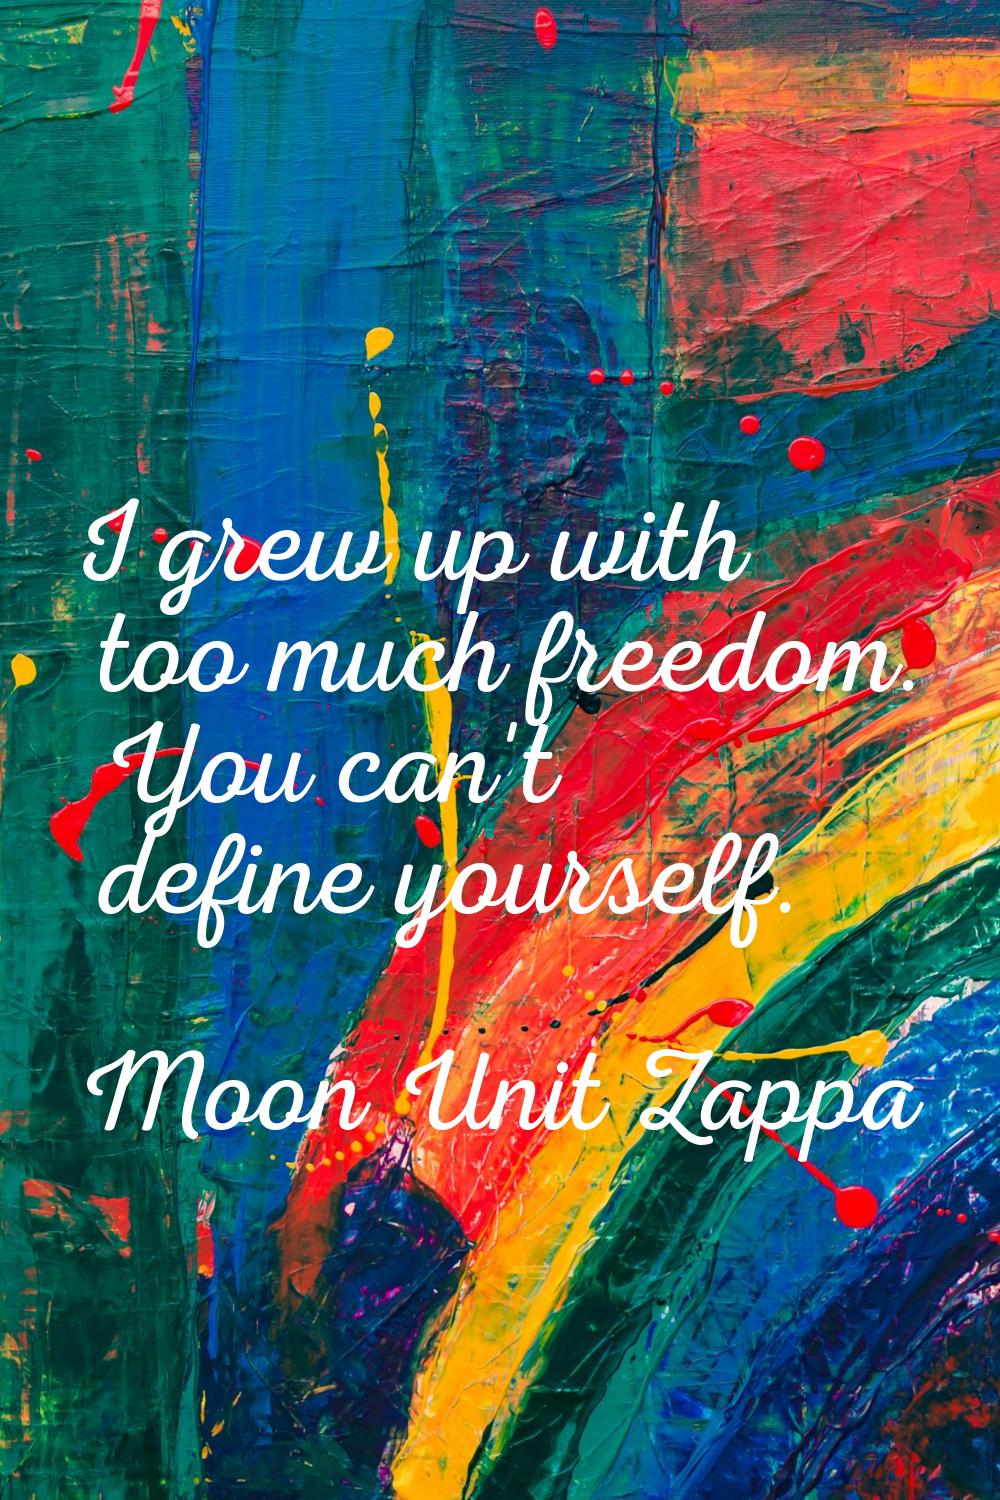 I grew up with too much freedom. You can't define yourself.